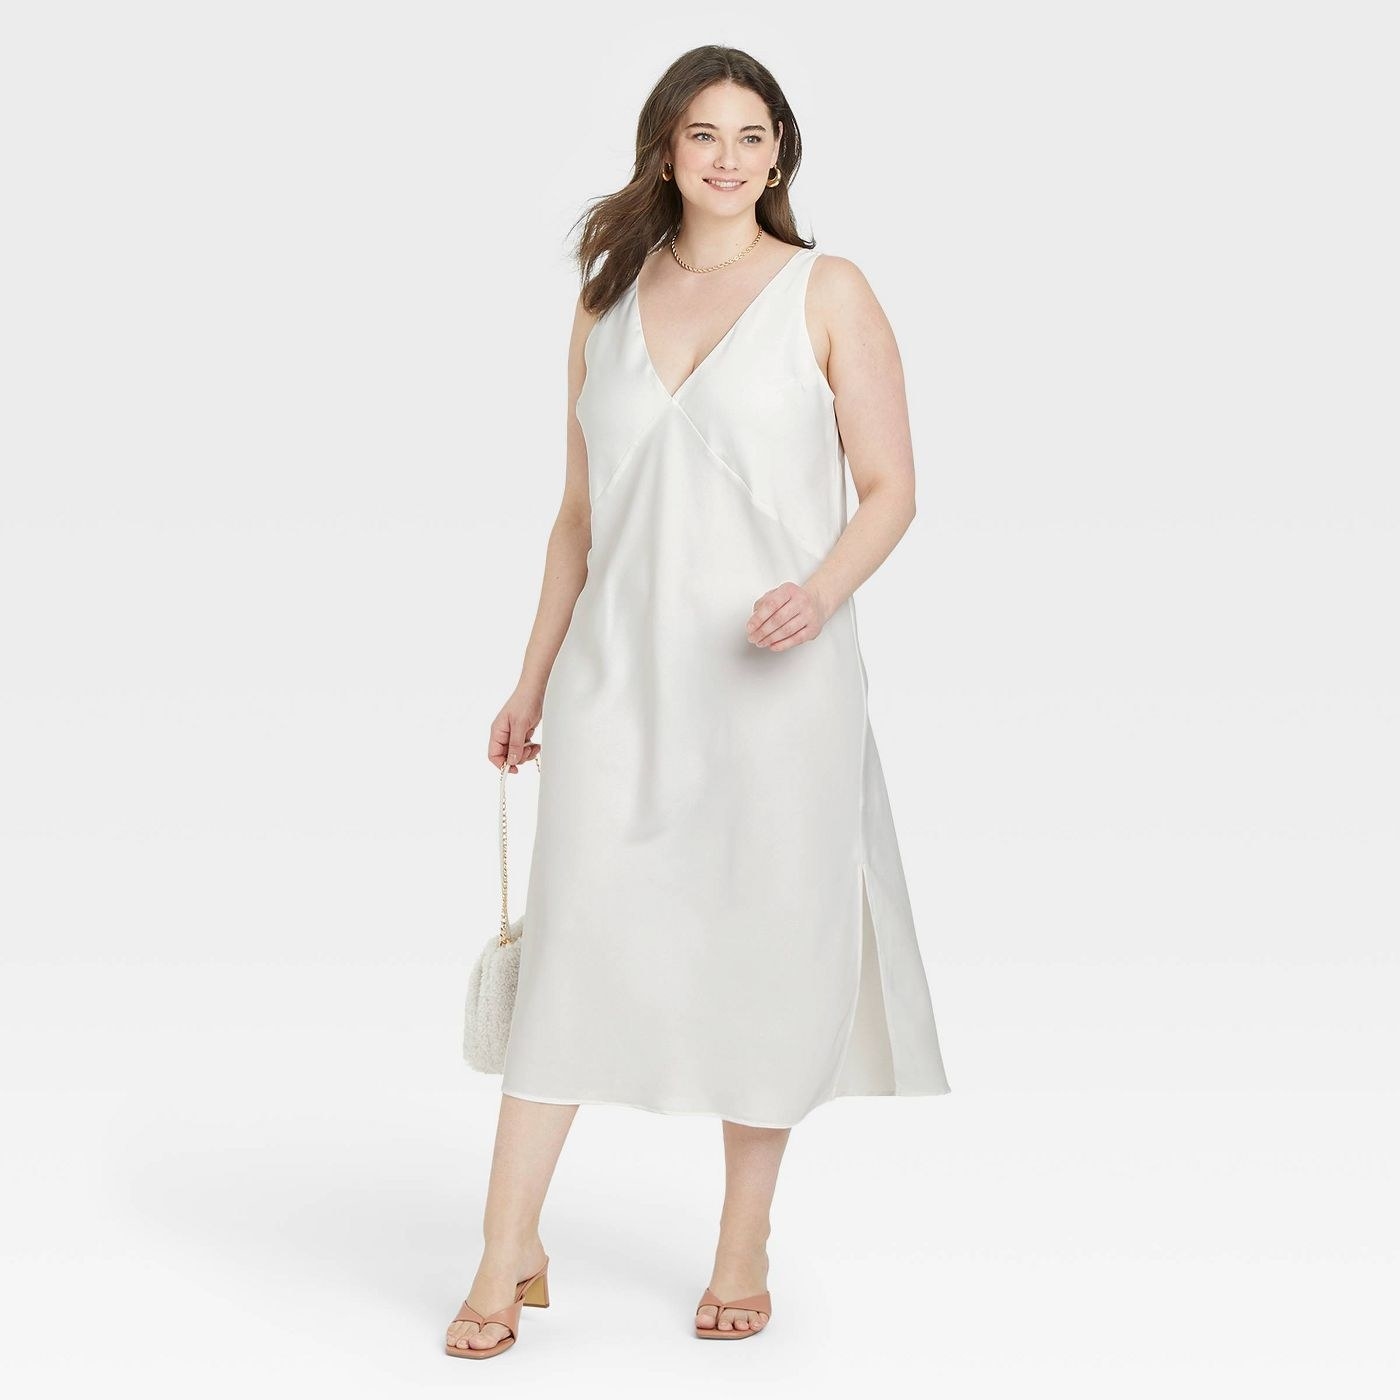 Model wearing white slip dress, white bag and nude shoes